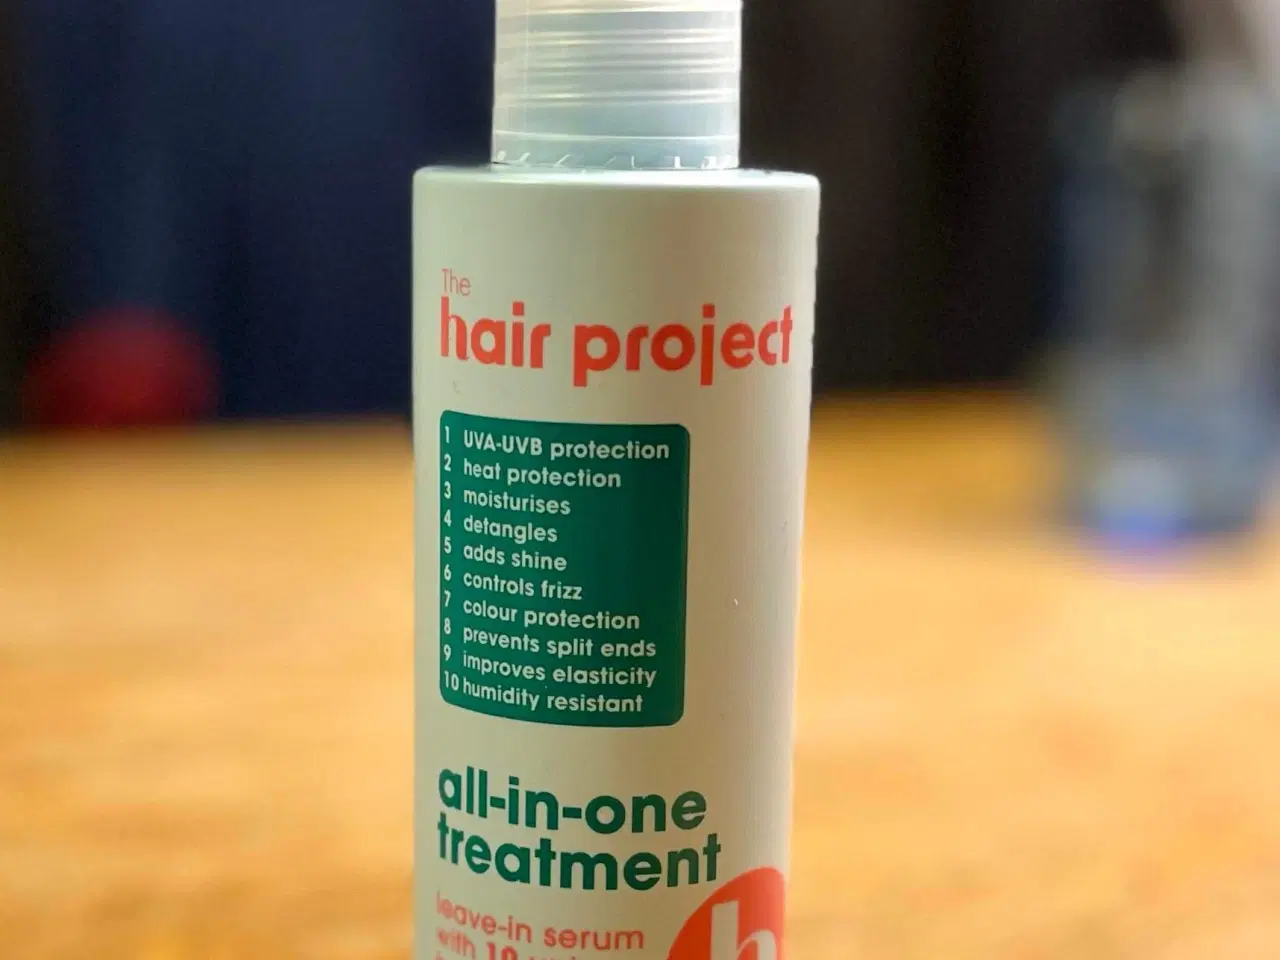 Billede 1 - All-in-one treatment - The hair project